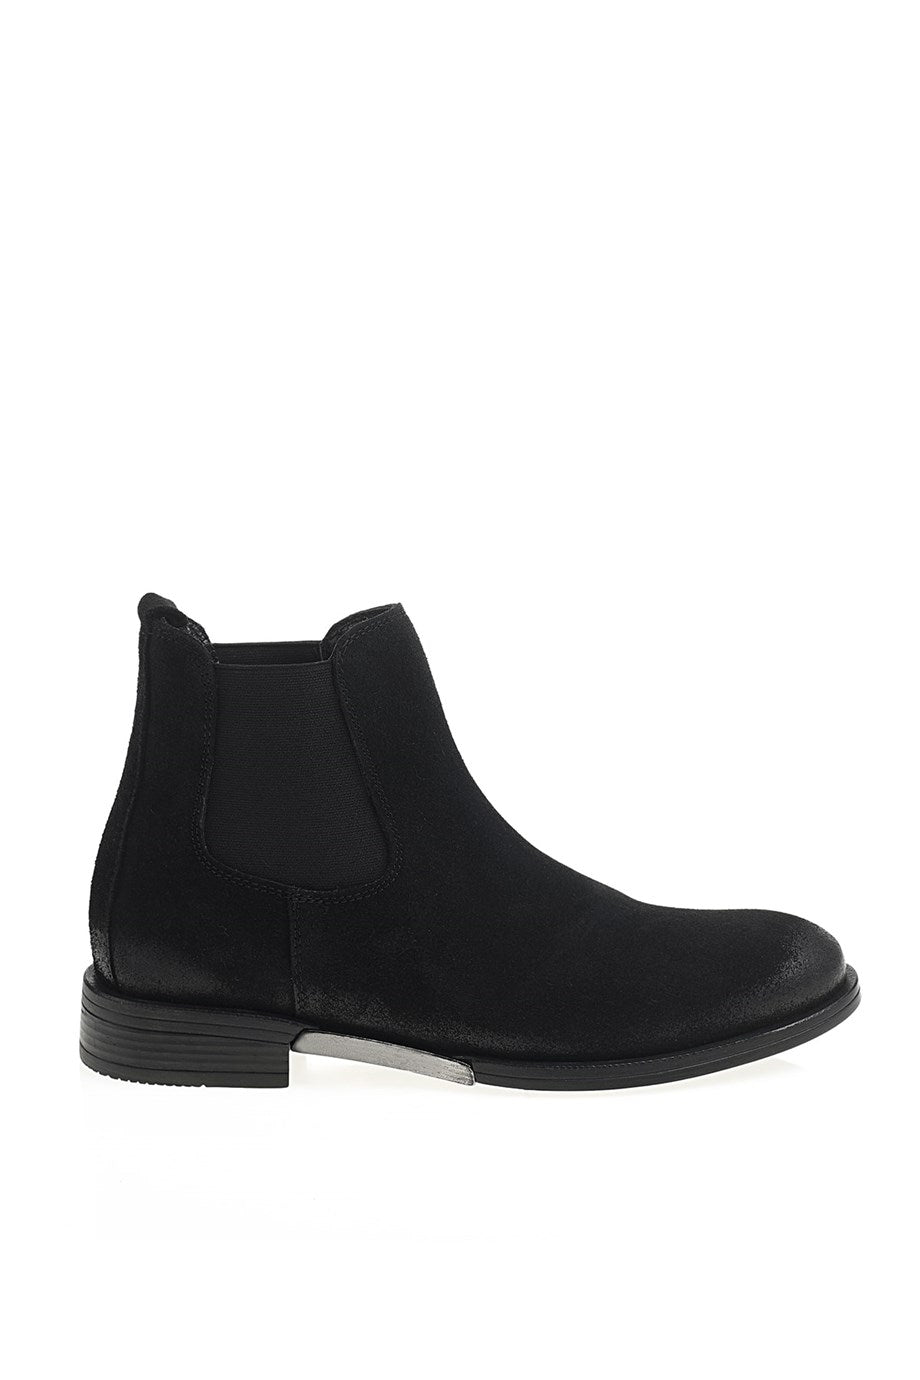 Inner Outer Genuine Suede Leather Boots - MENSTYLEWITH